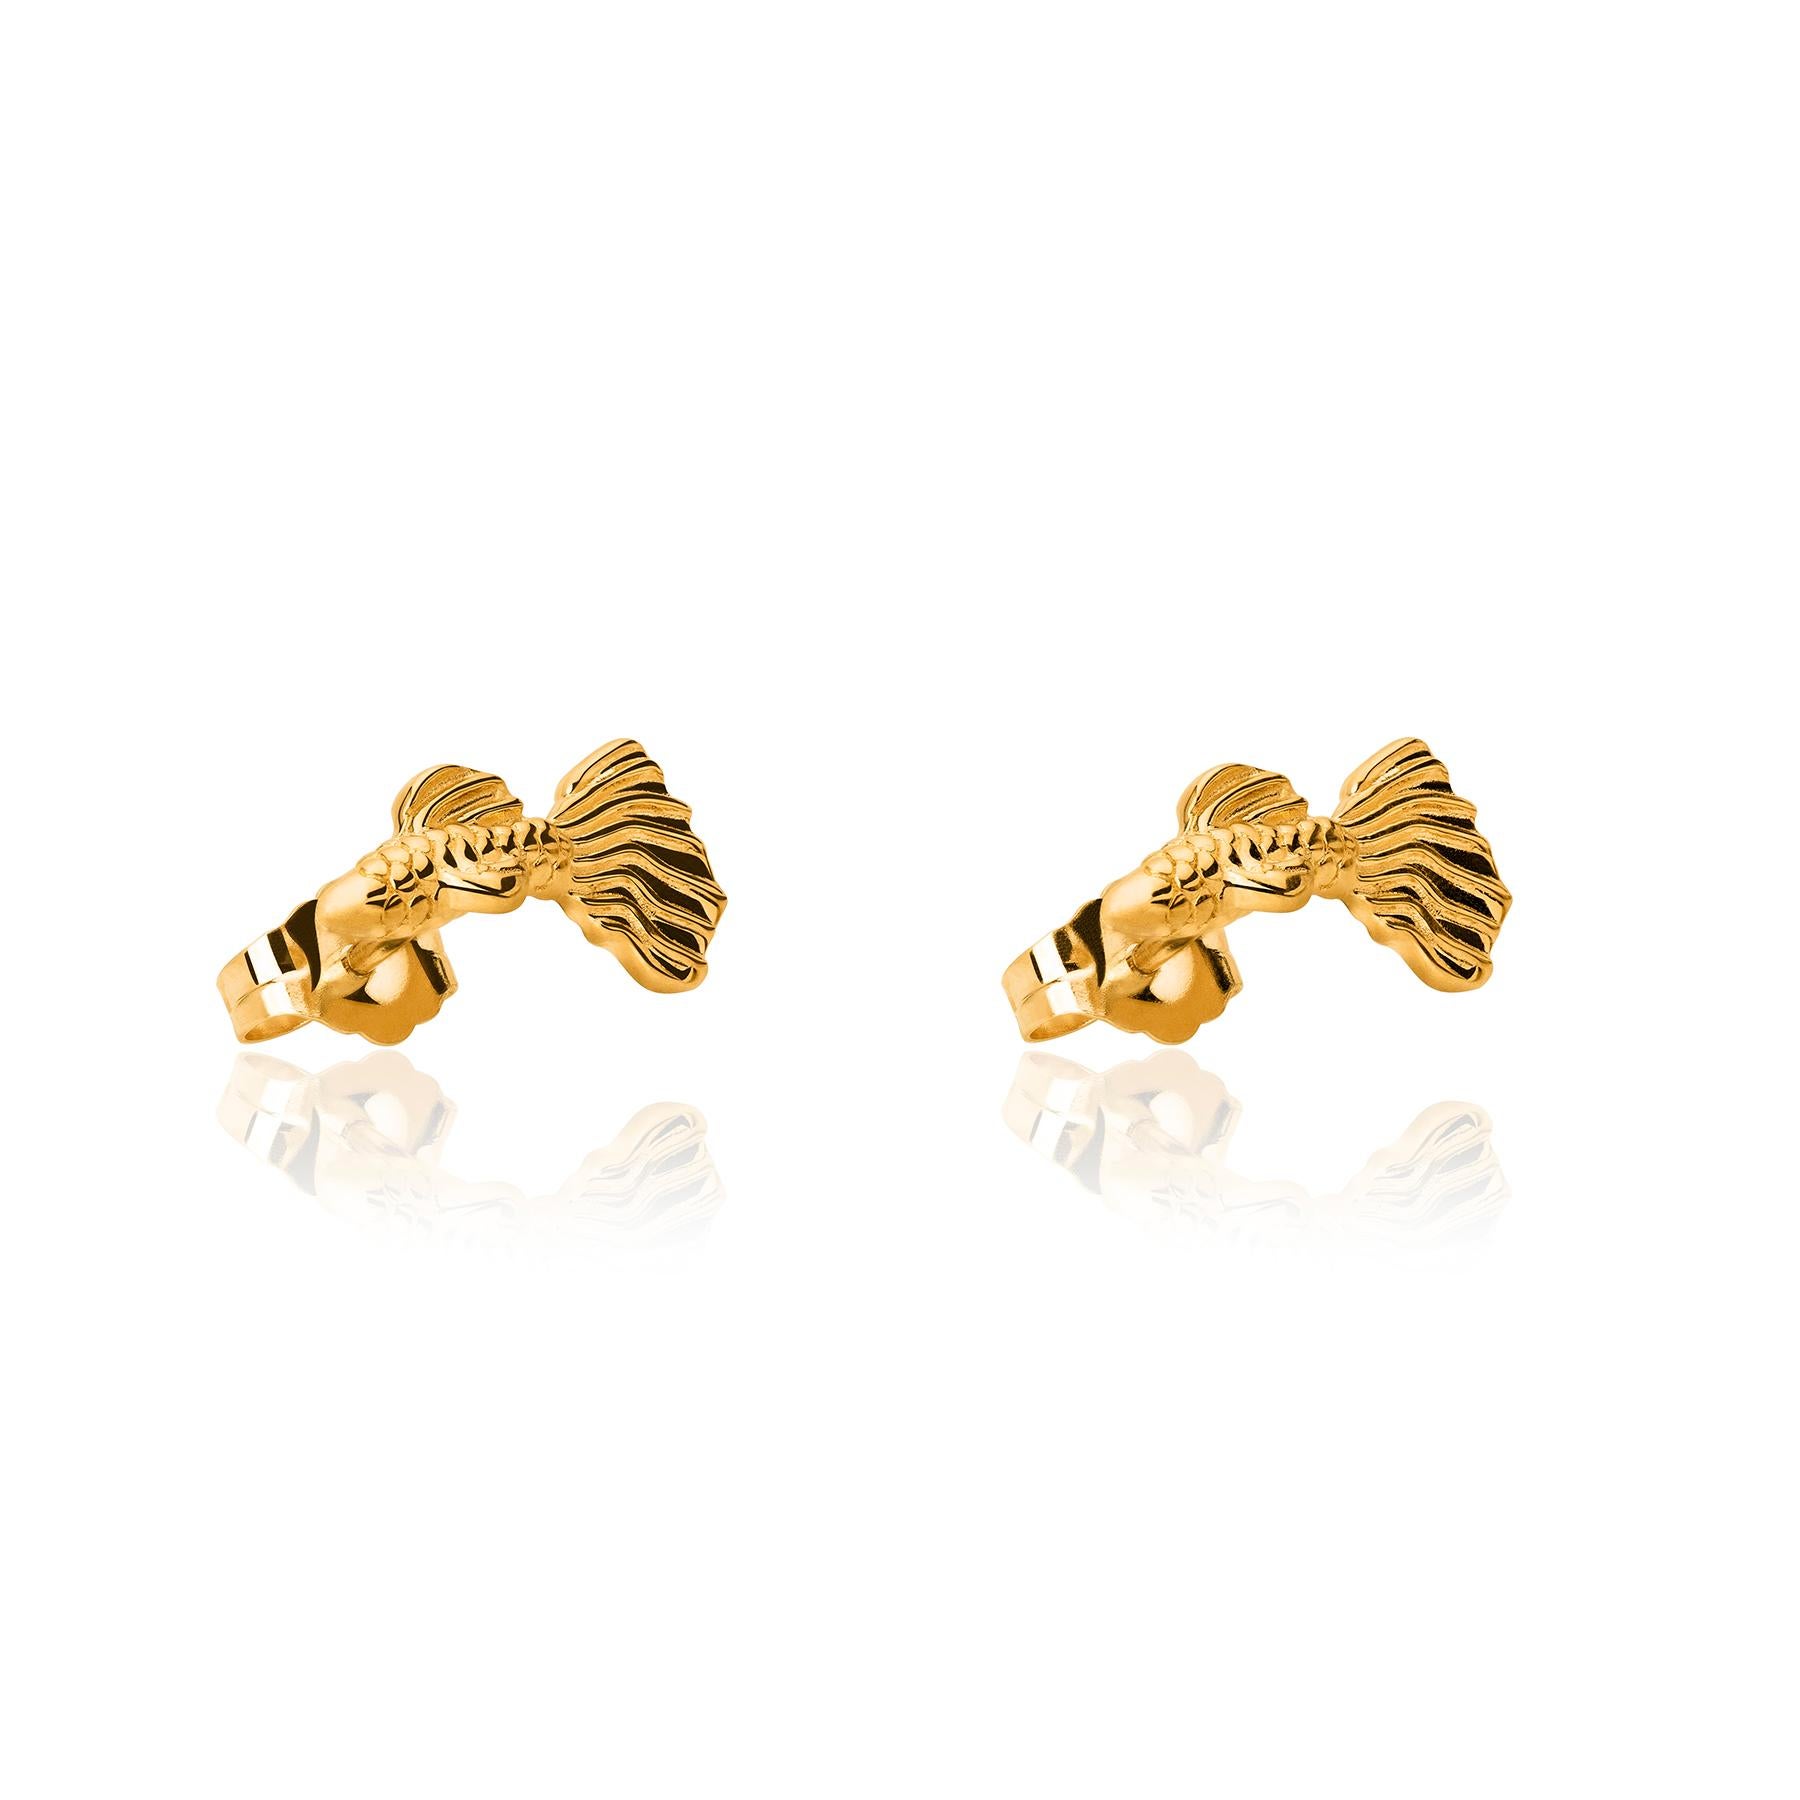 The Fish Gold Earrings from the Animales Collection by TANE are made in 18 karat yellow gold. They are made in the shape of a fish sculpted with the utmost attention to detail in its shape and textures. Handmade in Mexico.